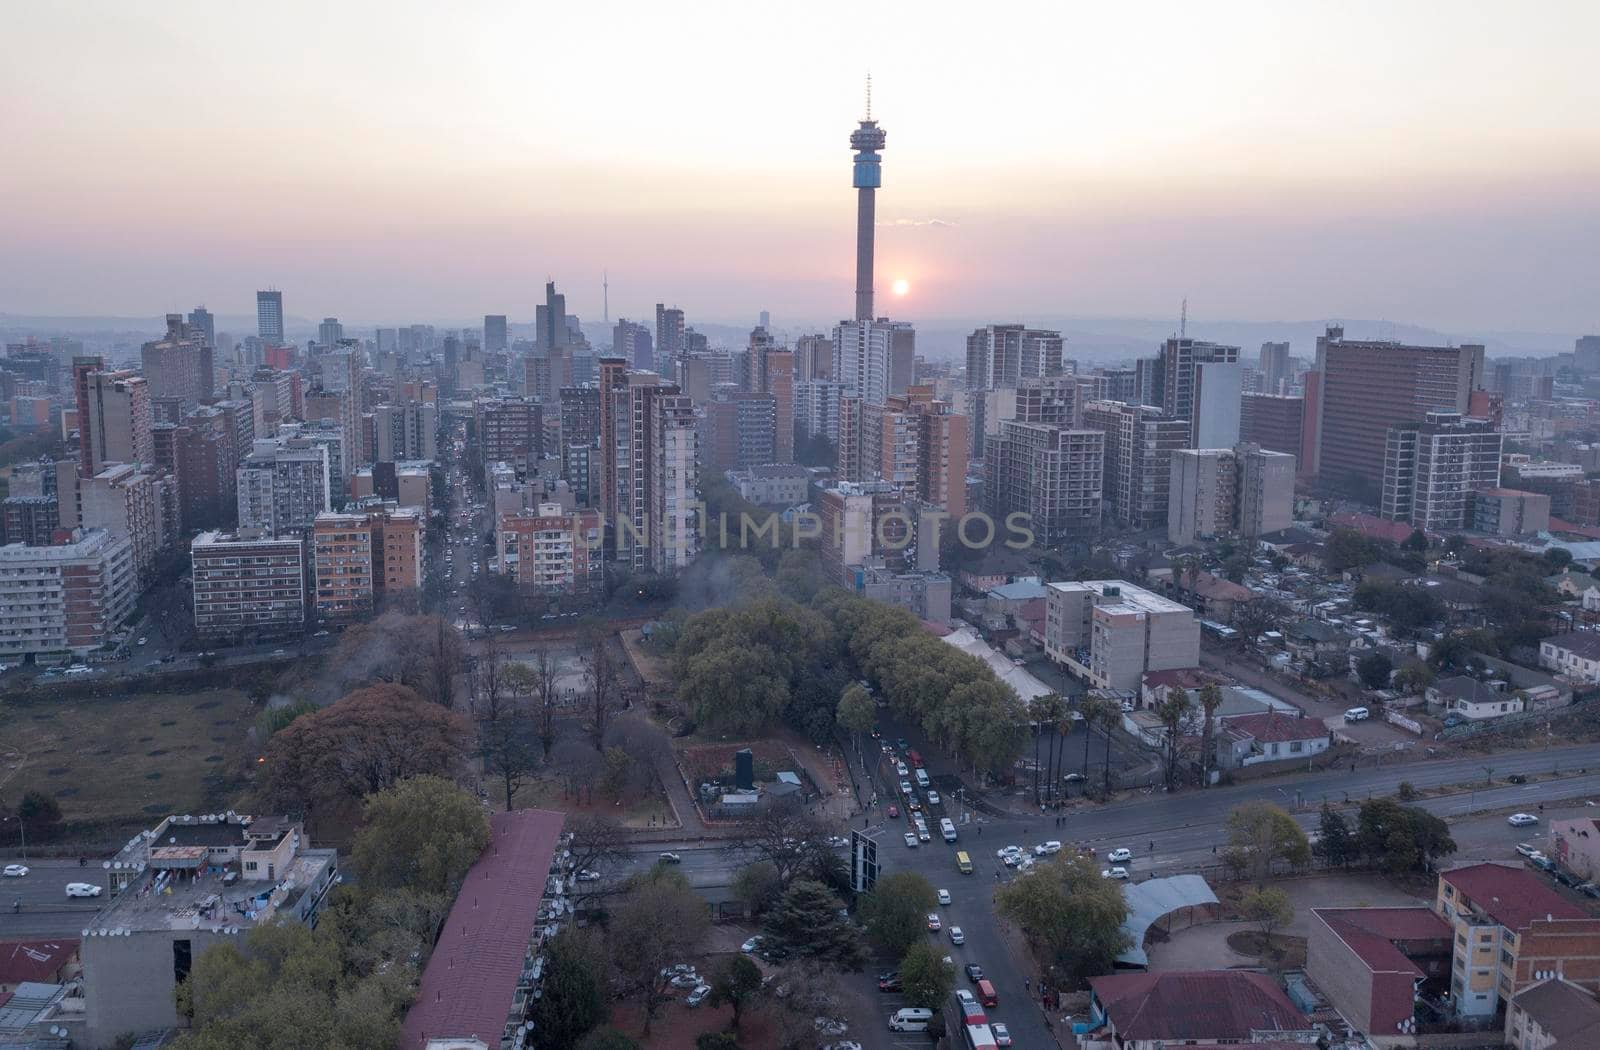 Aerial view of Johannesburg CBD at sunset, South Africa